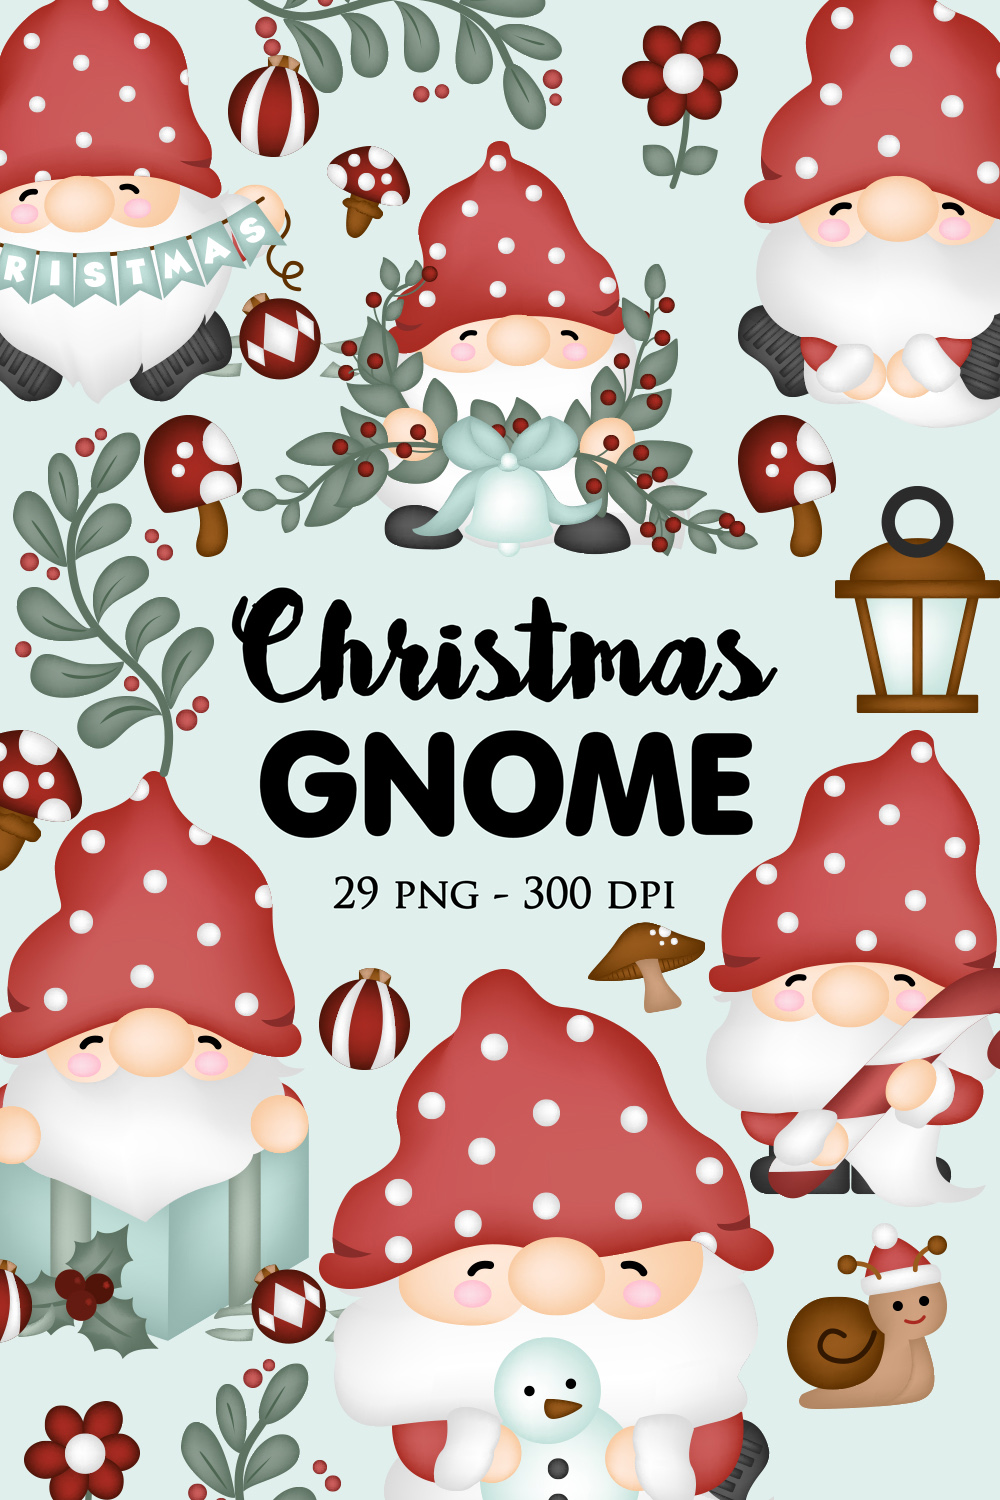 Collection of beautiful images of Christmas gnomes.